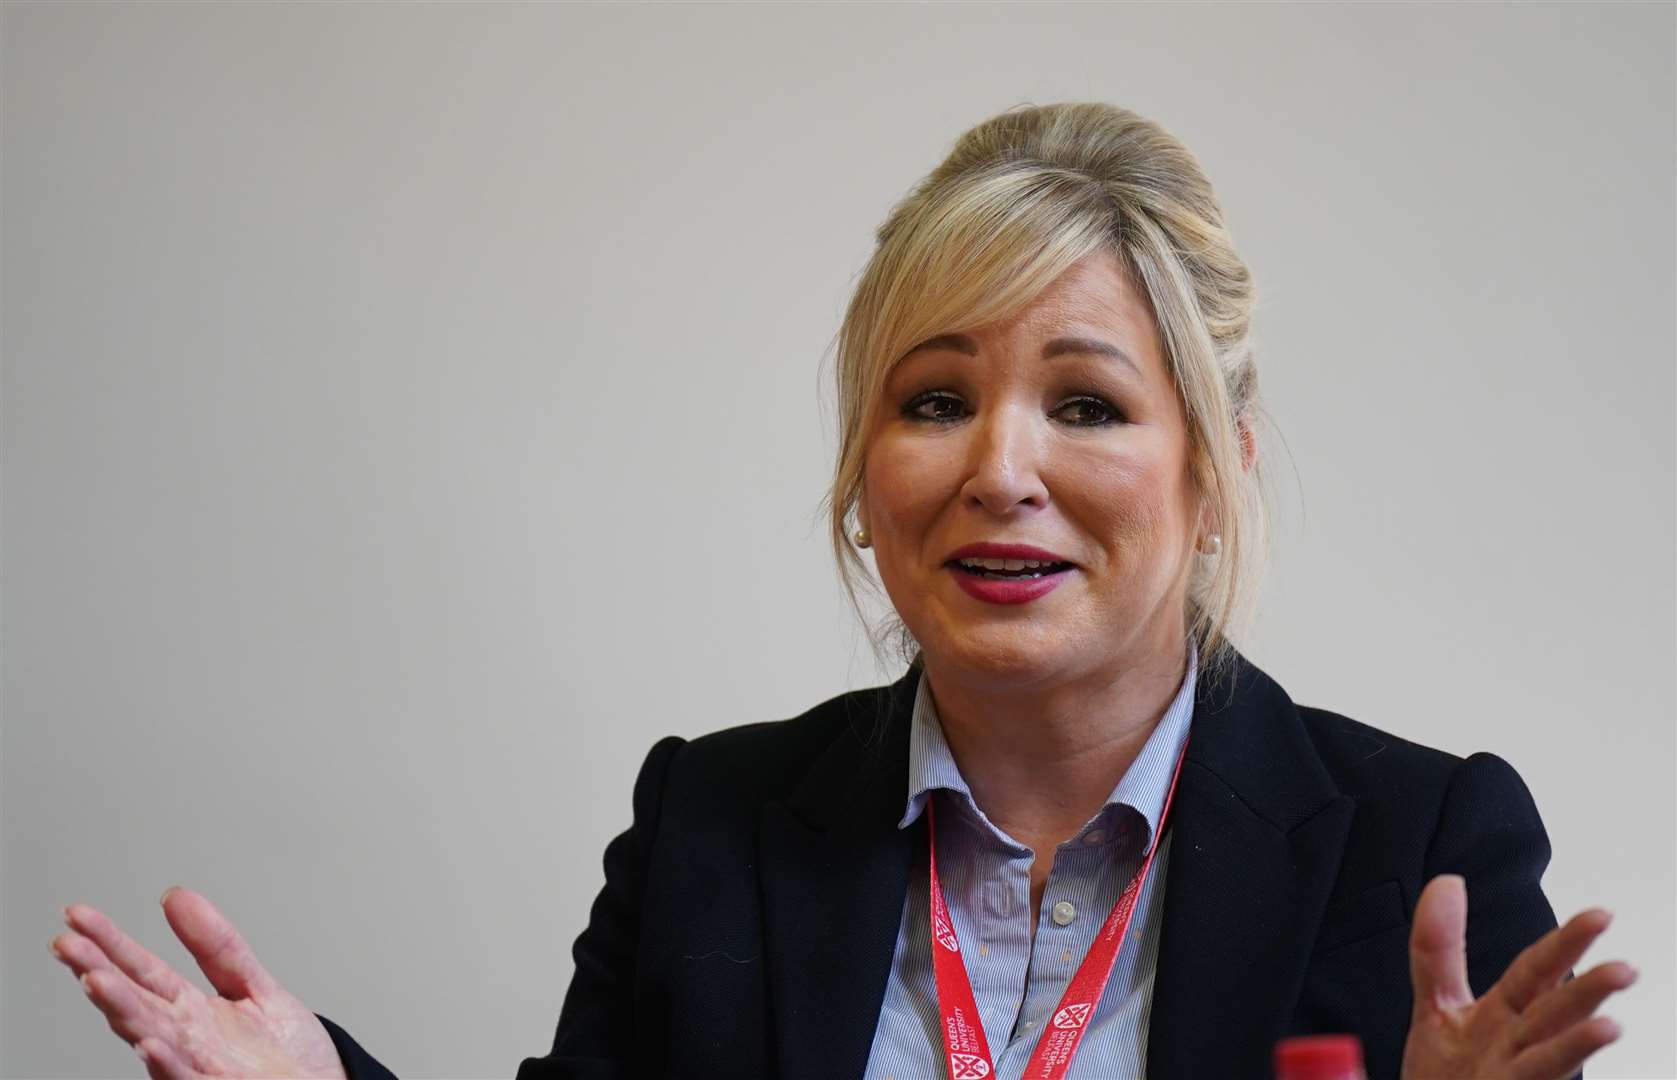 Sinn Fein vice president Michelle O’Neill speaking to the media at the Queen’s conference (Niall Carson/PA).